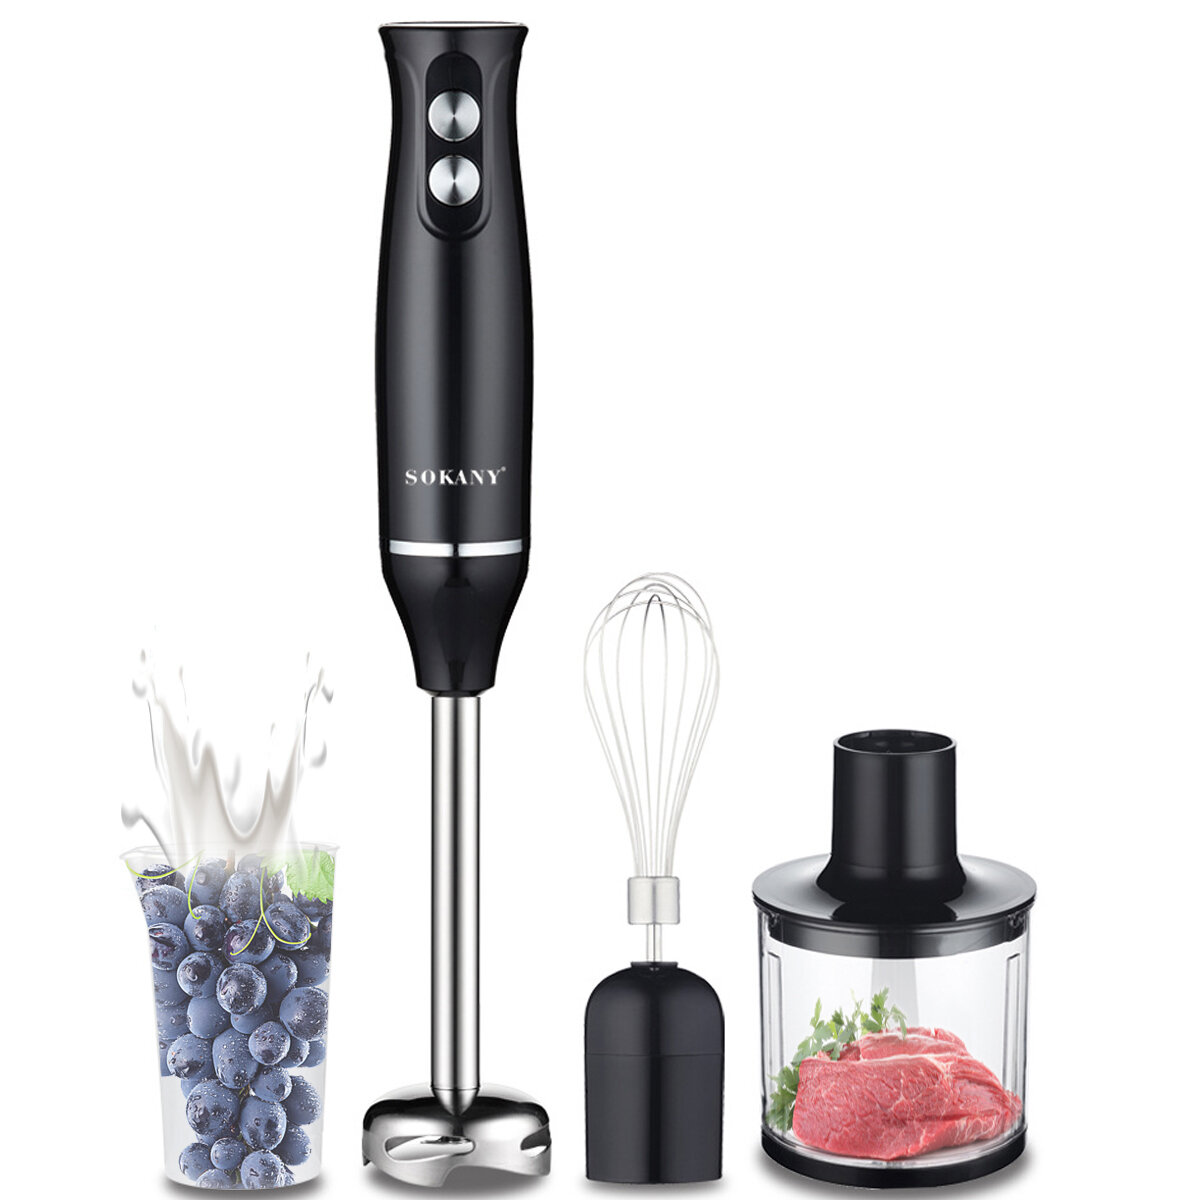 

SOKANY 1710-4 500W 4 in 1 Electric Immersion Hand Blender Stick Mixer Set, Stainless Steel Stick Blender Food Processor